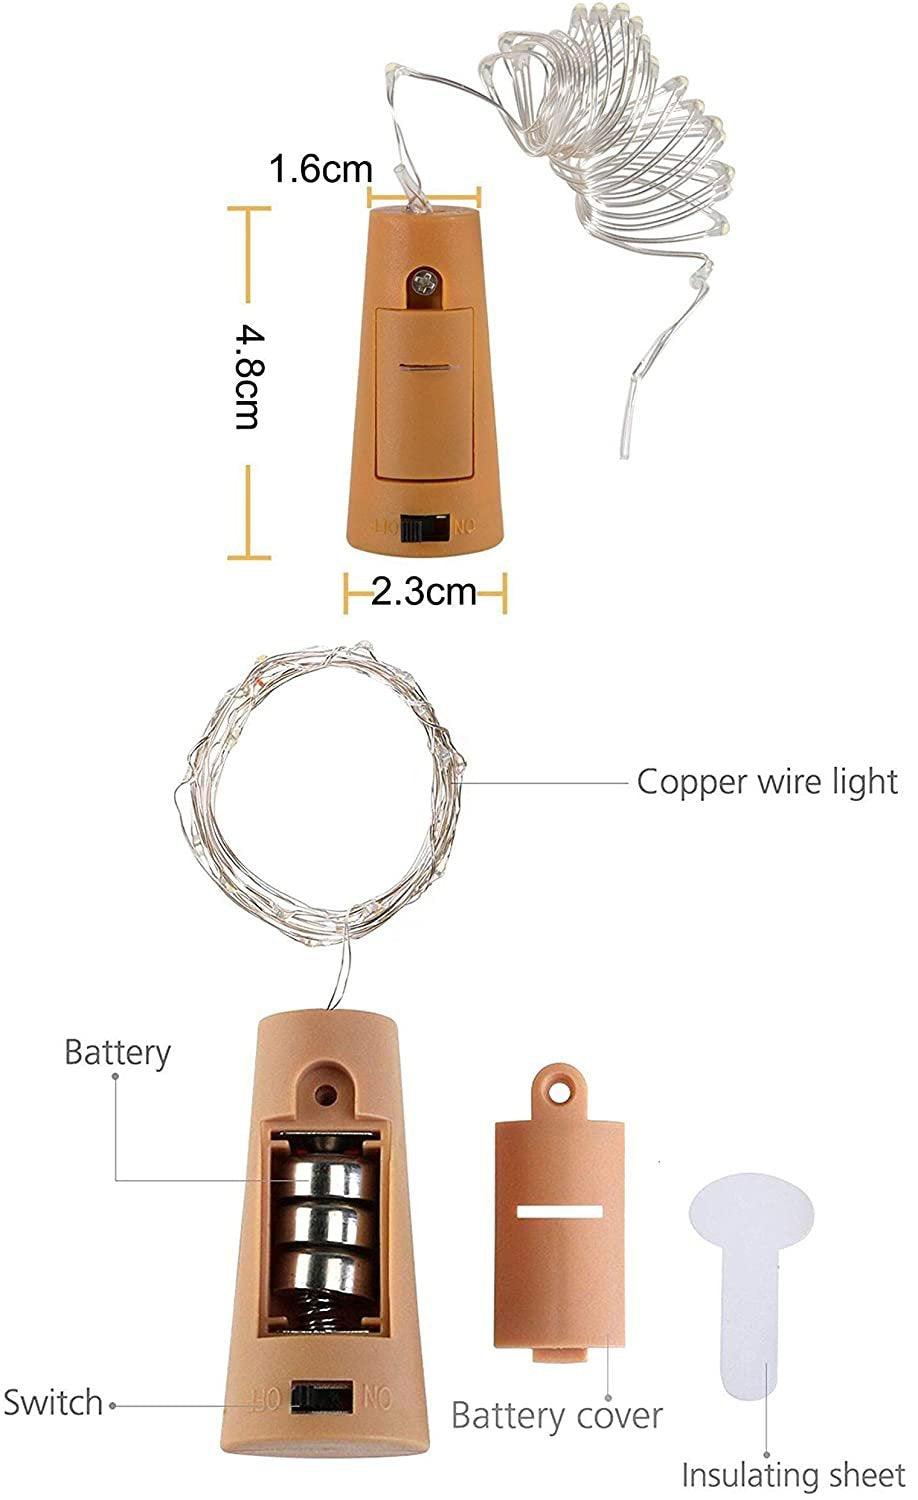 Wine Bottle Cork Lights Mini Copper Wire Lights for Bedroom Decor - If you say i do